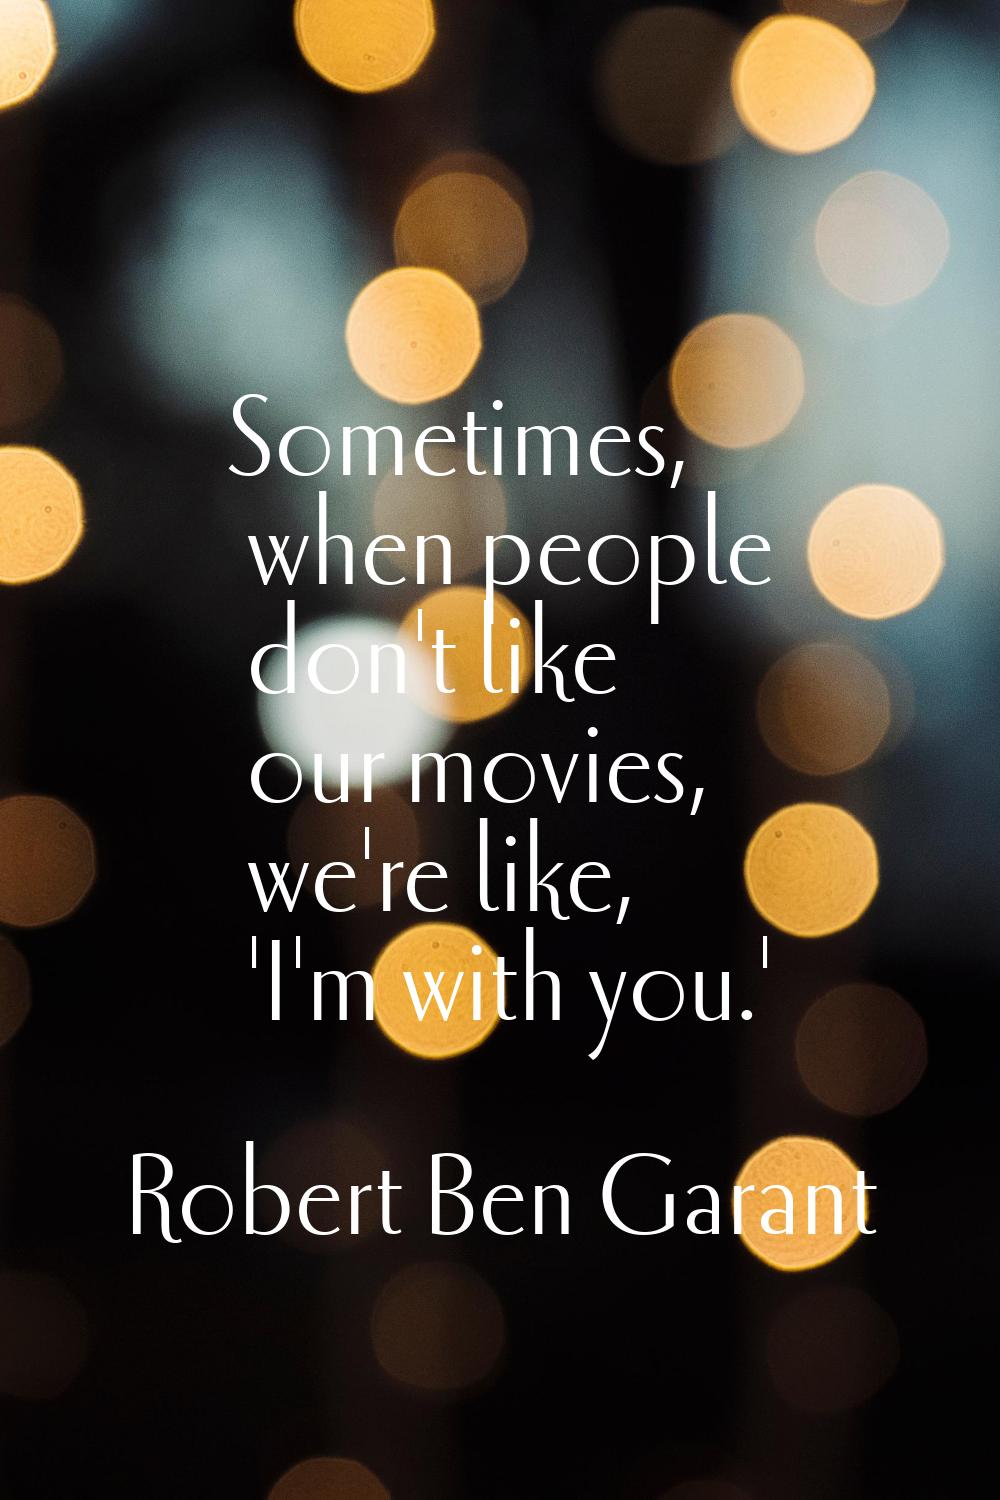 Sometimes, when people don't like our movies, we're like, 'I'm with you.'